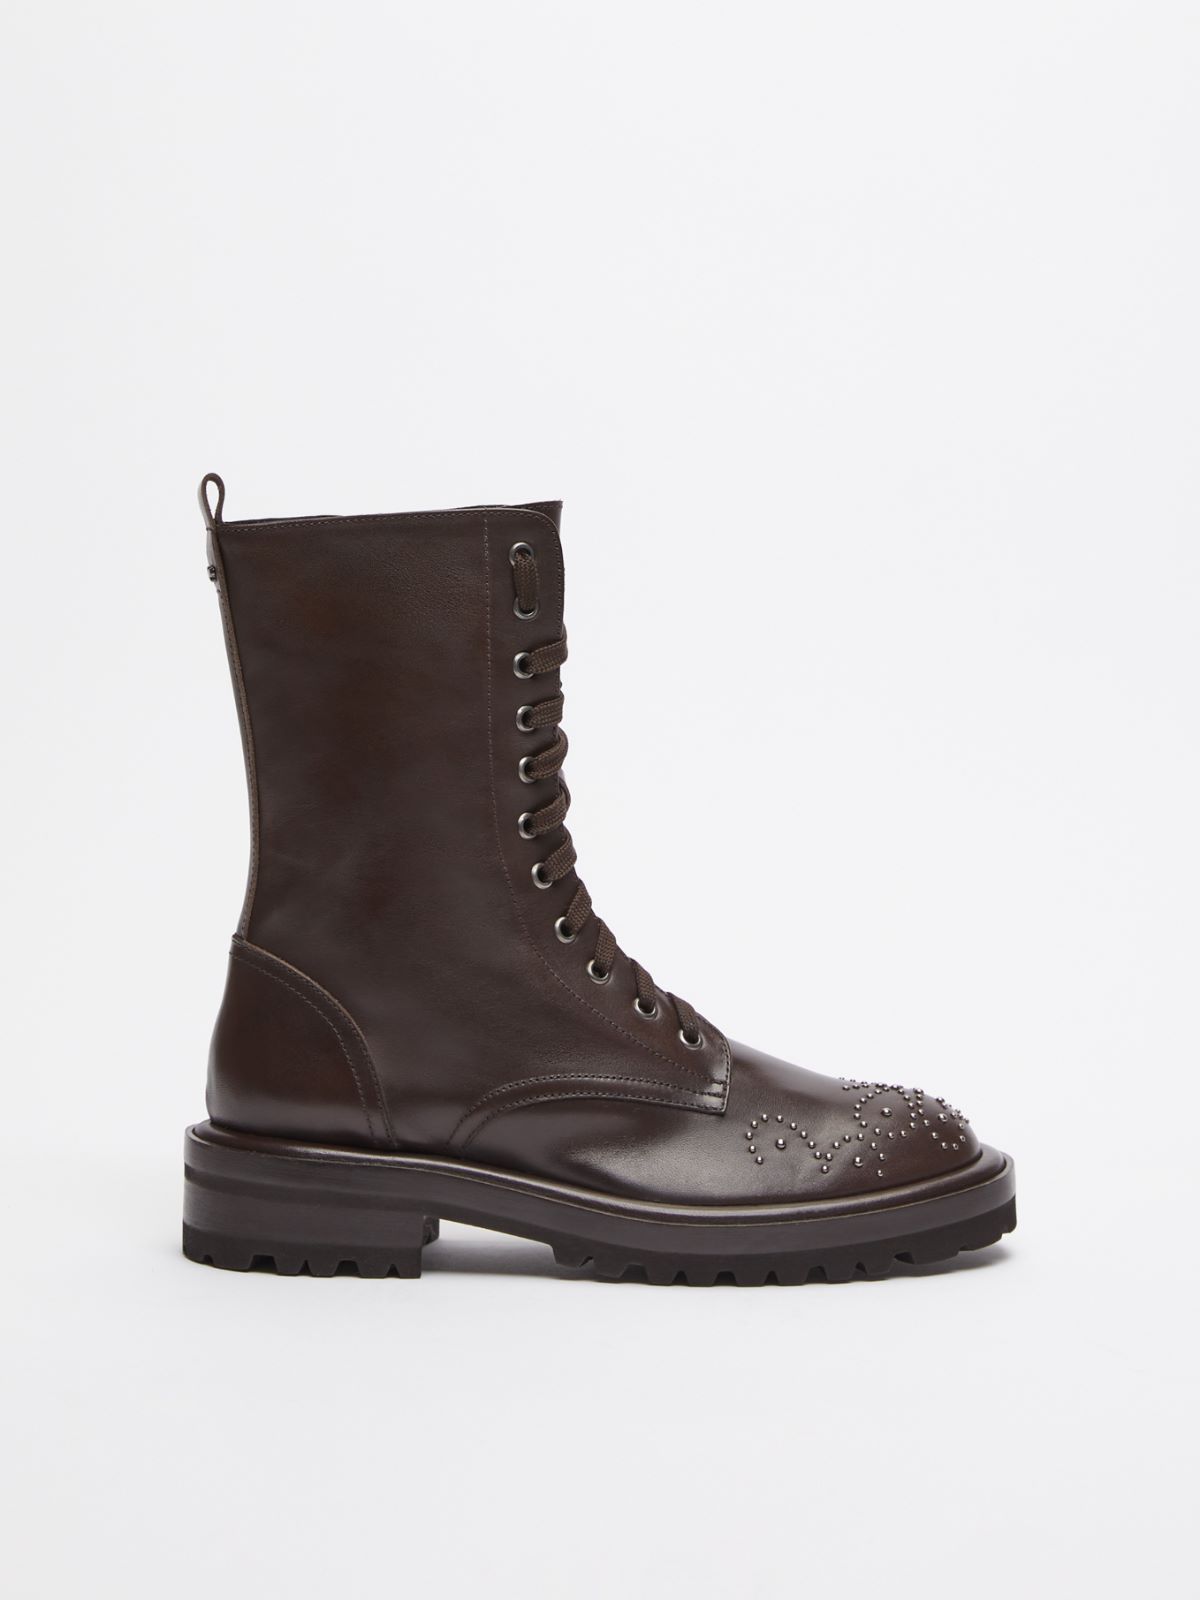 Lace-up ankle boots  - COFFEE - Weekend Max Mara